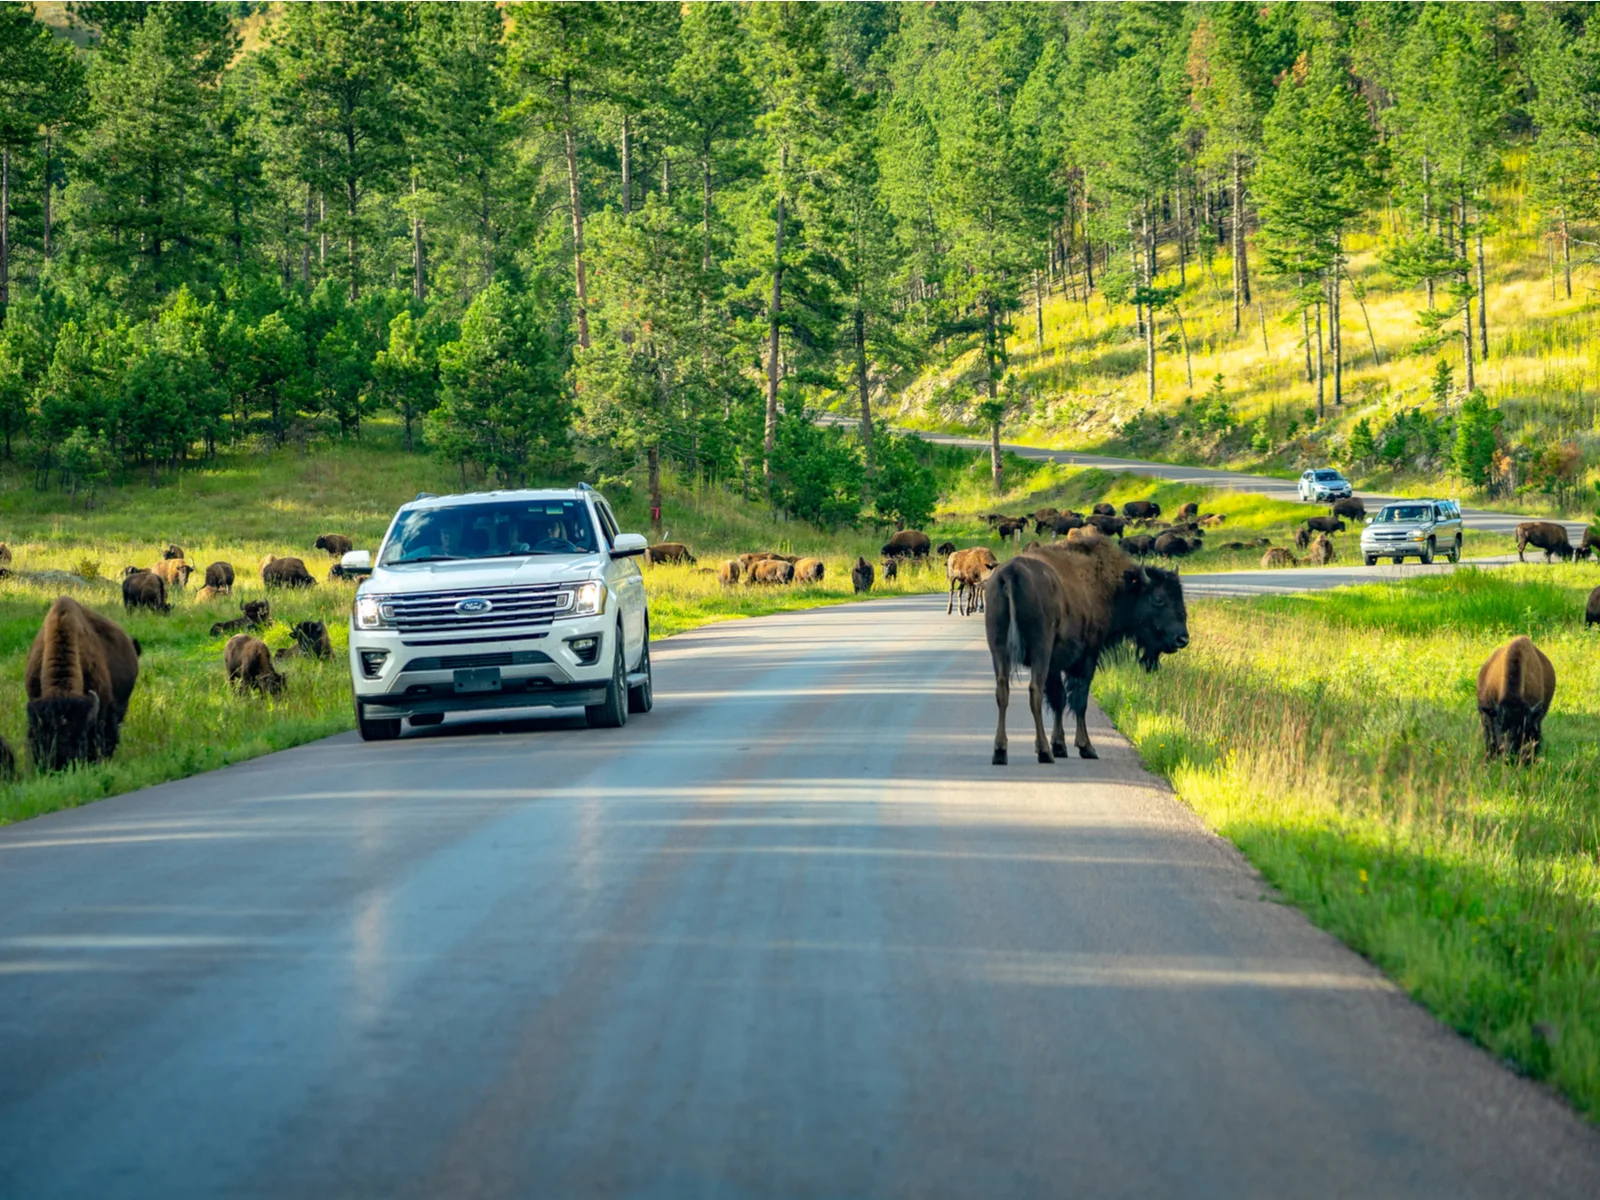 Buffalo in Custer State Park, one of South Dakota's best tourist attractions